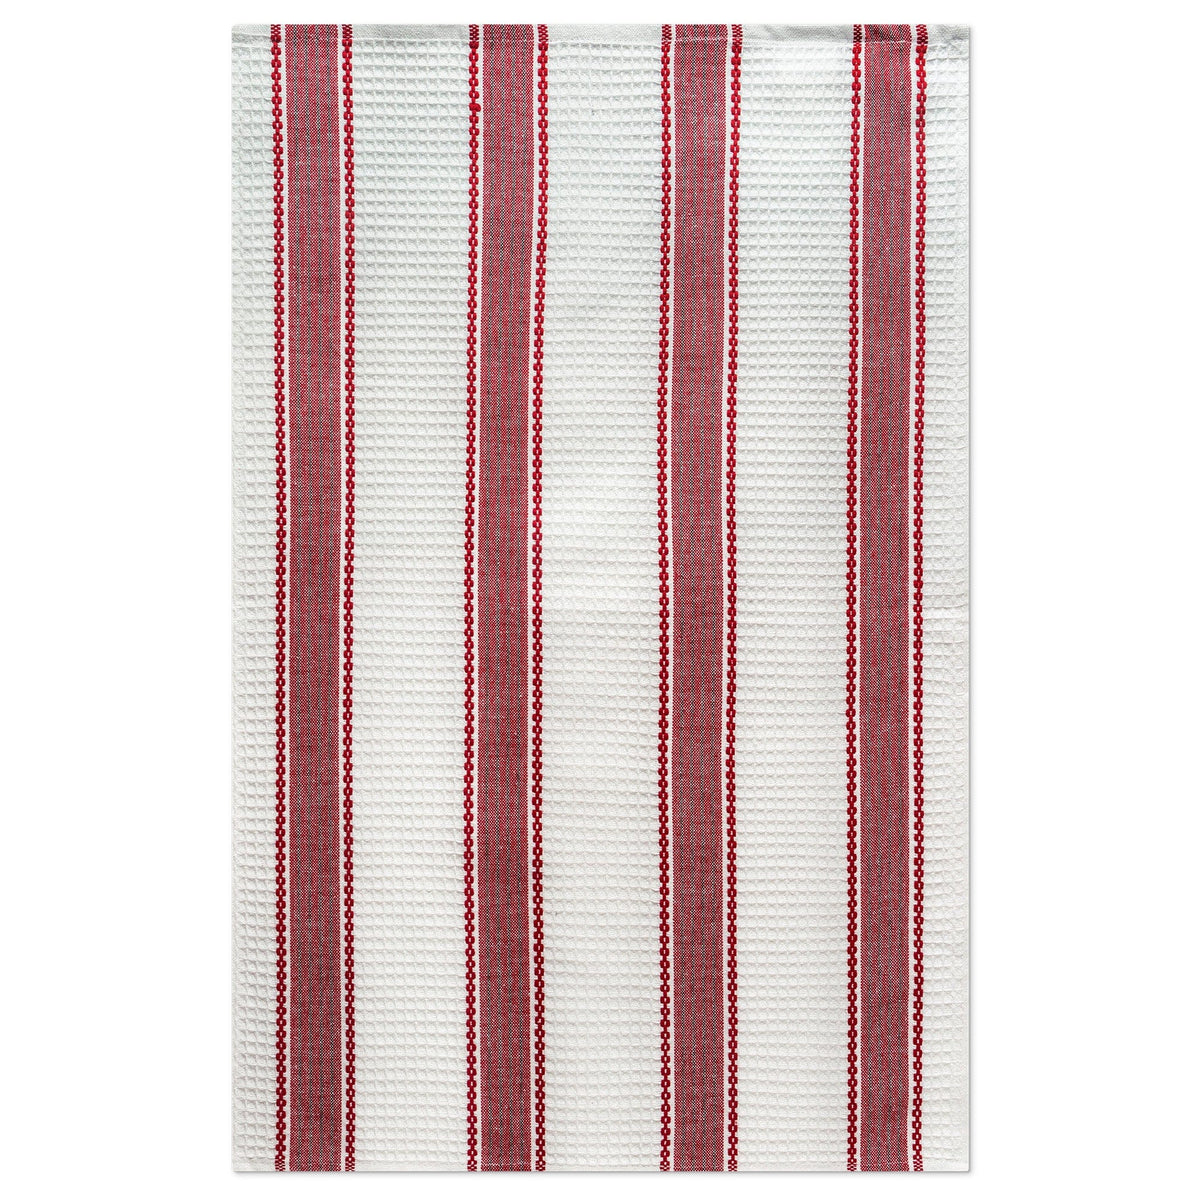 Woven Kitchen Towels 2 Piece- Red and White Stripes